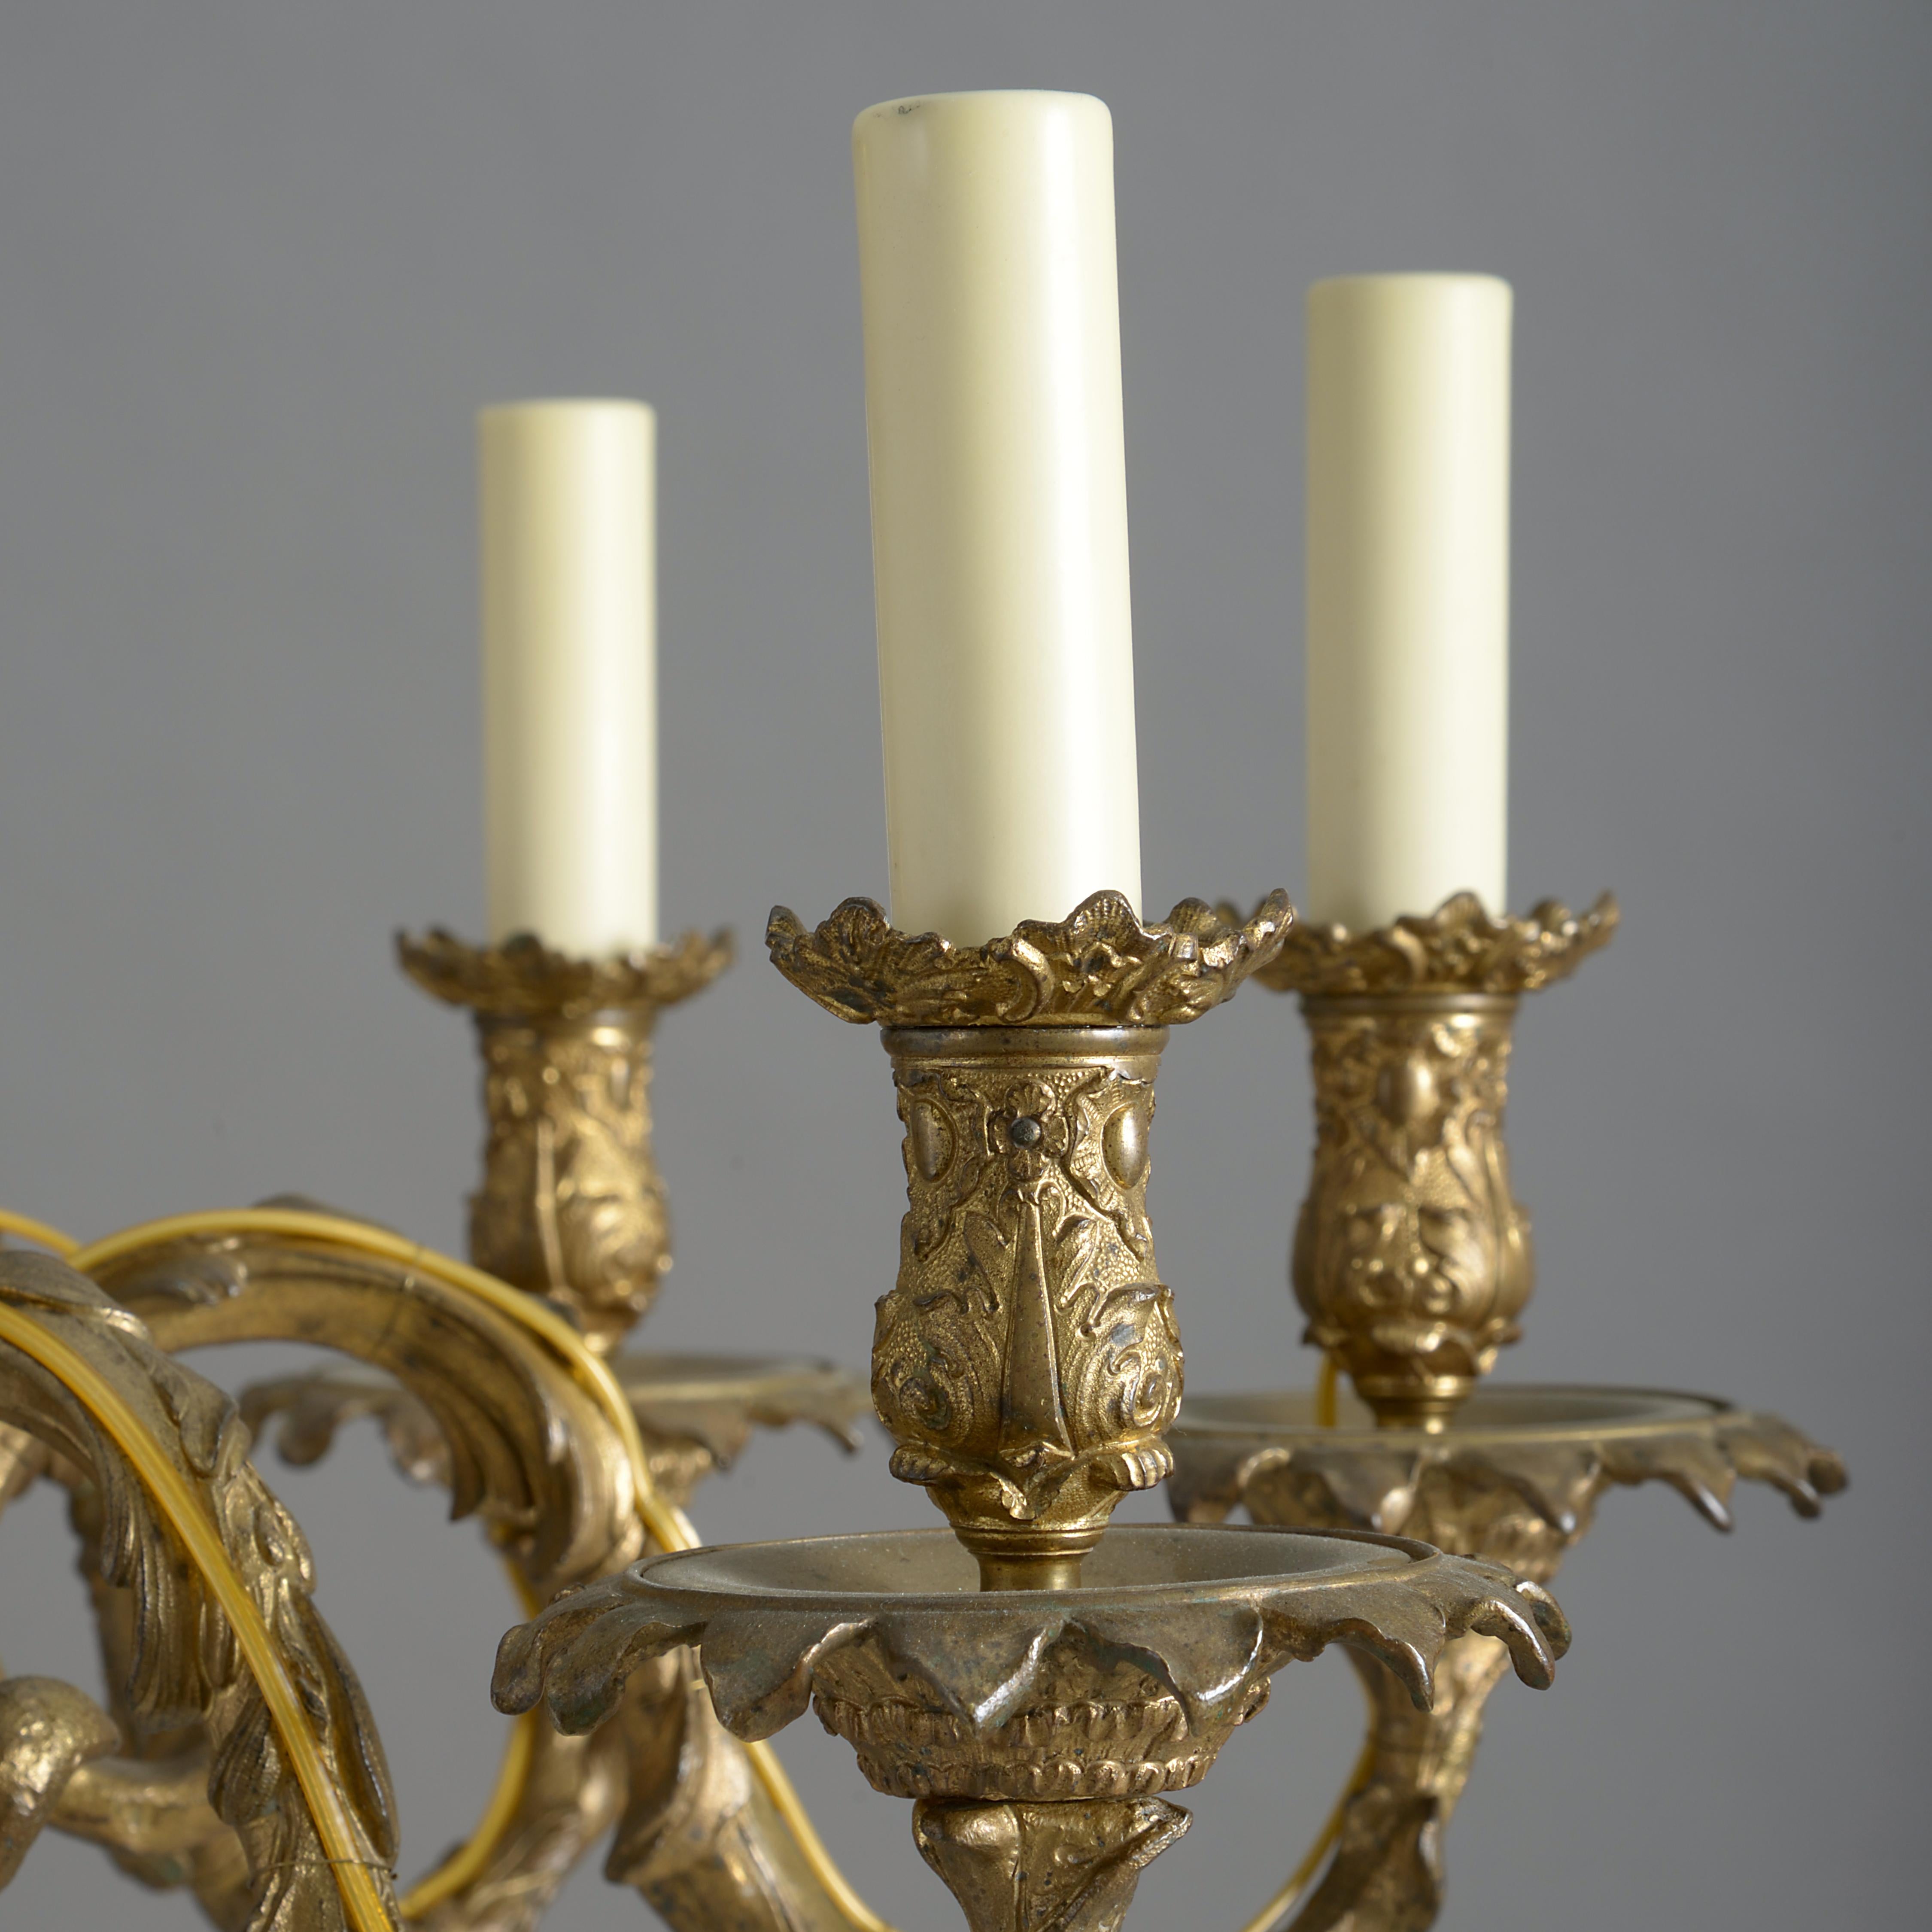 A fine George IV lacquered brass eight-light chandelier, circa 1830.